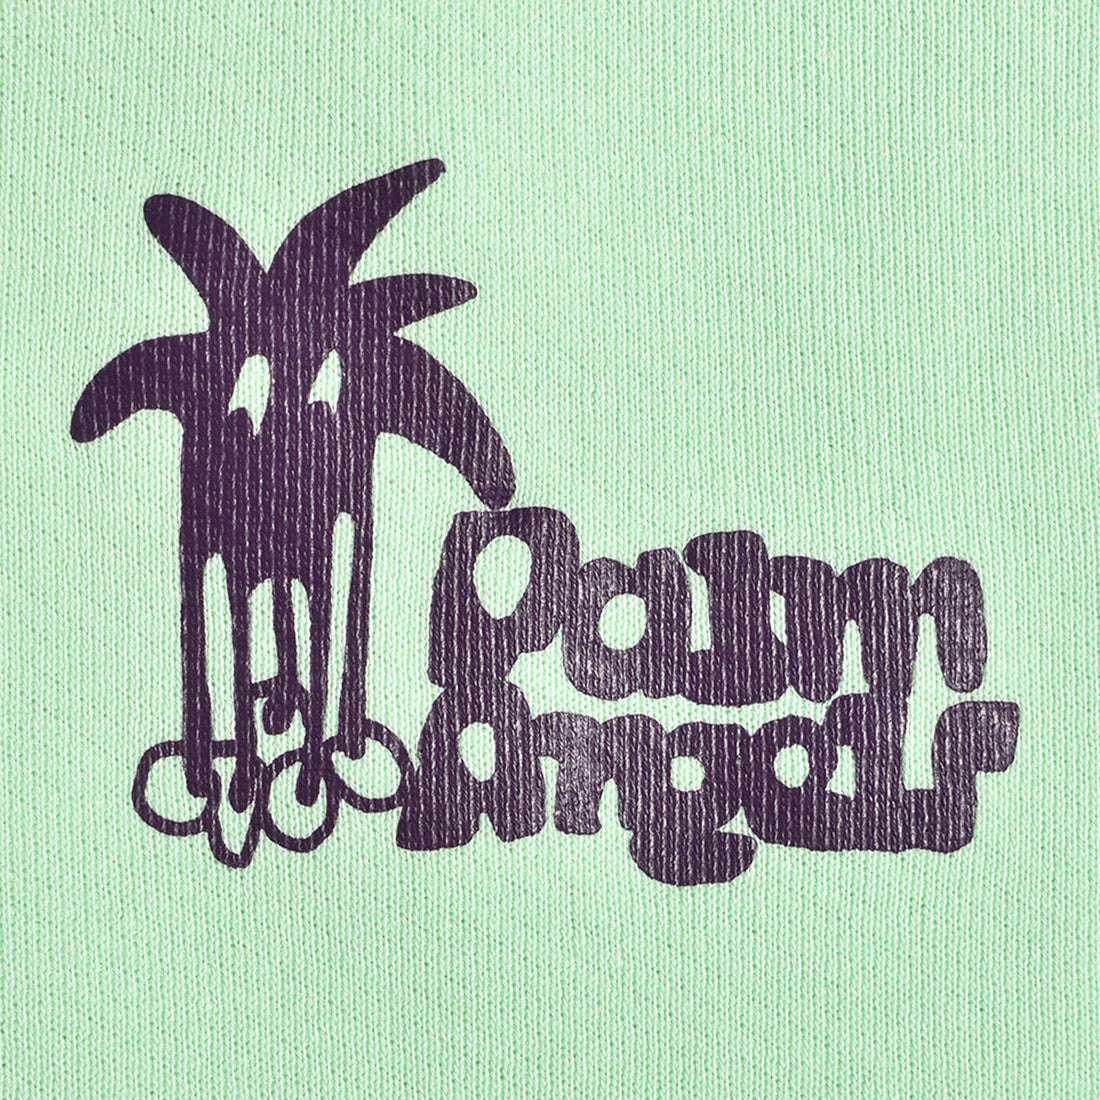 [Palm Angels]"DOUBY" CLASSIC HOODY/LIGHT GREEN(PMBE23-046)